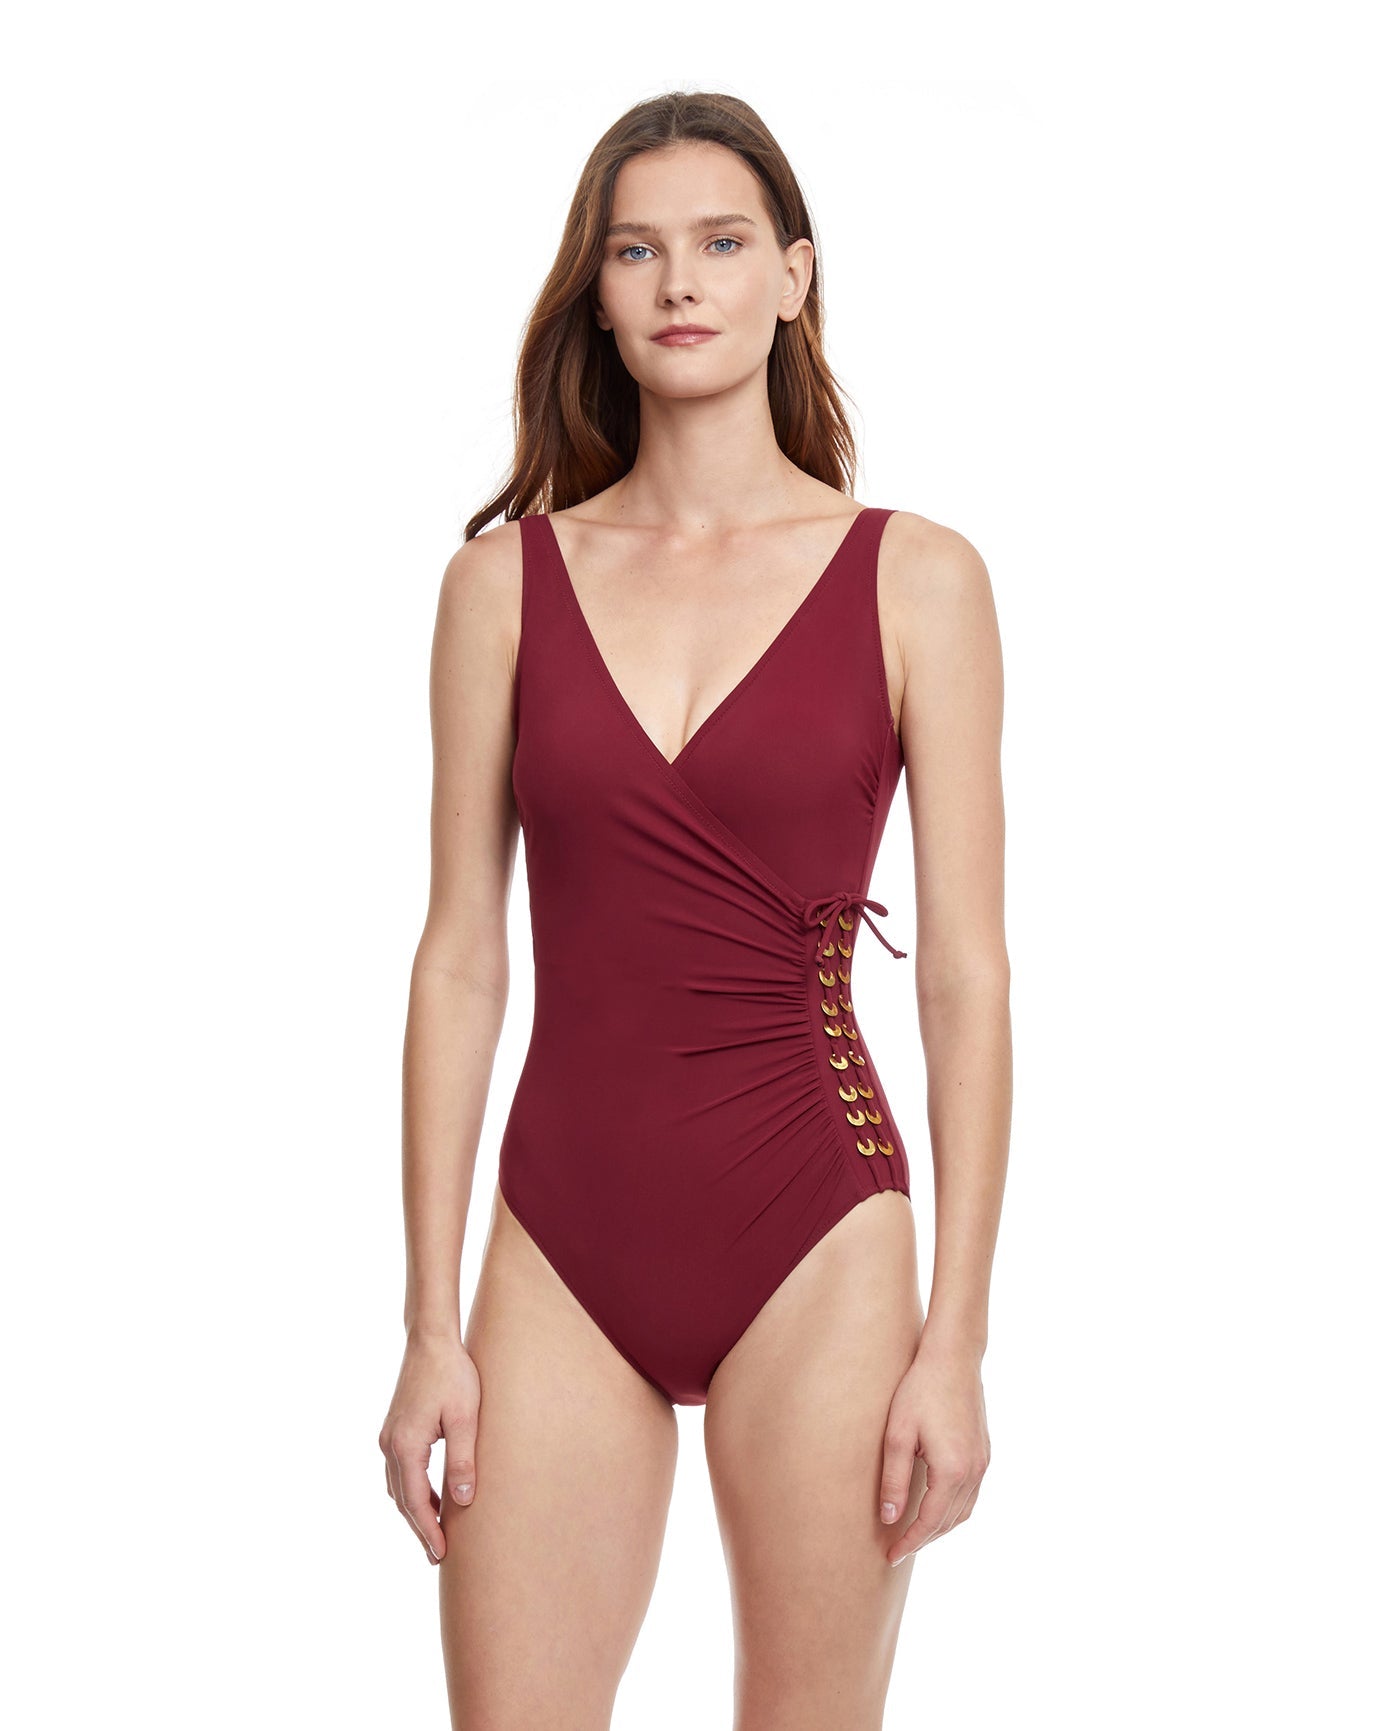 Front View Of Gottex Classic Golden Touch Full Coverage Surplice One Piece Swimsuit | Gottex Golden Touch Wine